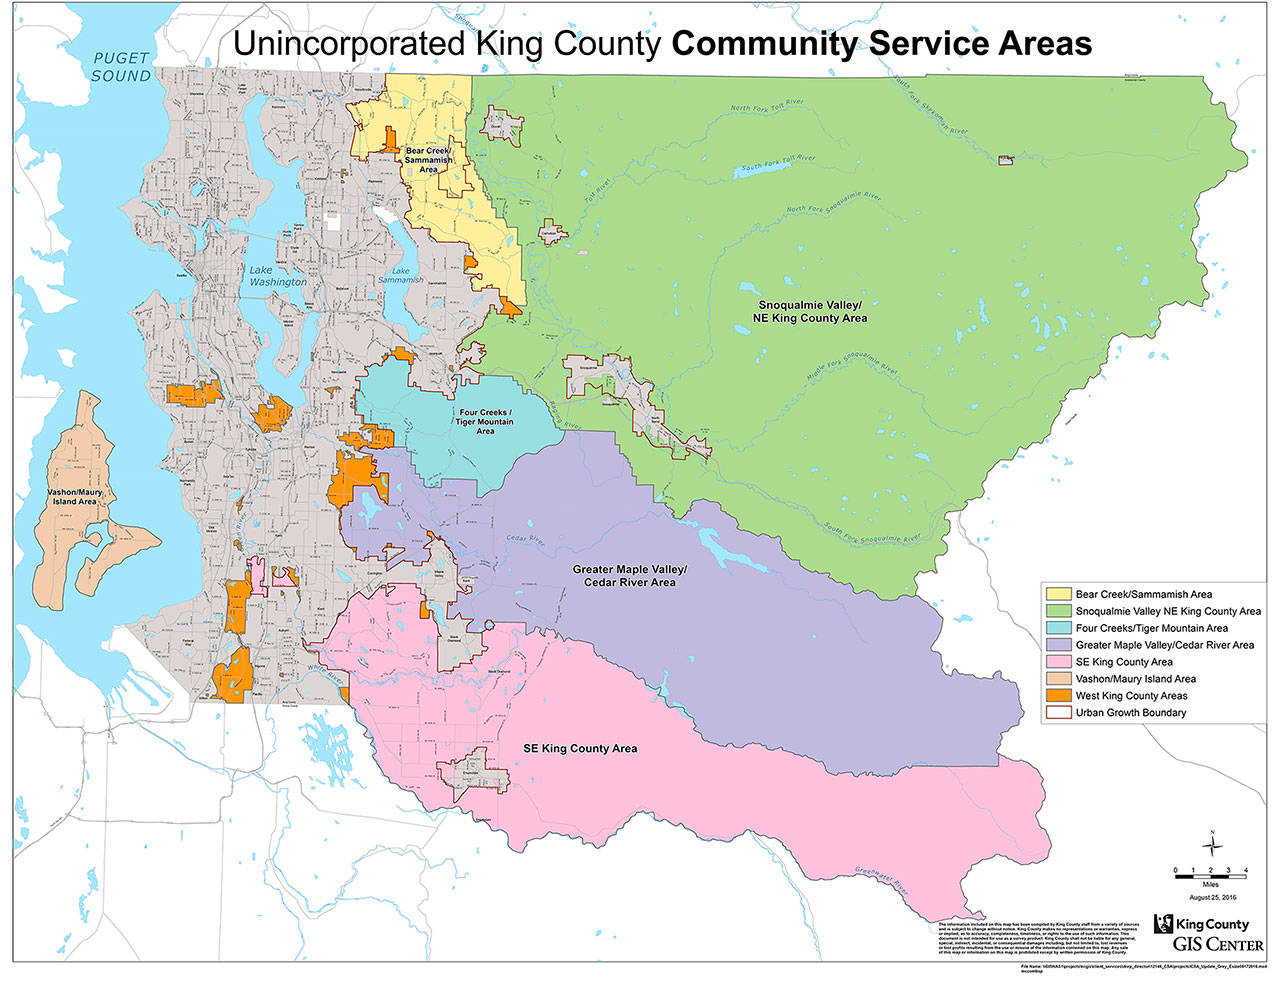 King County has seven Community Service Areas, some with their own nonprofit groups that advocate for their resdents. The Enumclaw Plateau Community Association would be the first in the Southeast King County CSA to advocate for local residents’ concerns. Image courtesy King County